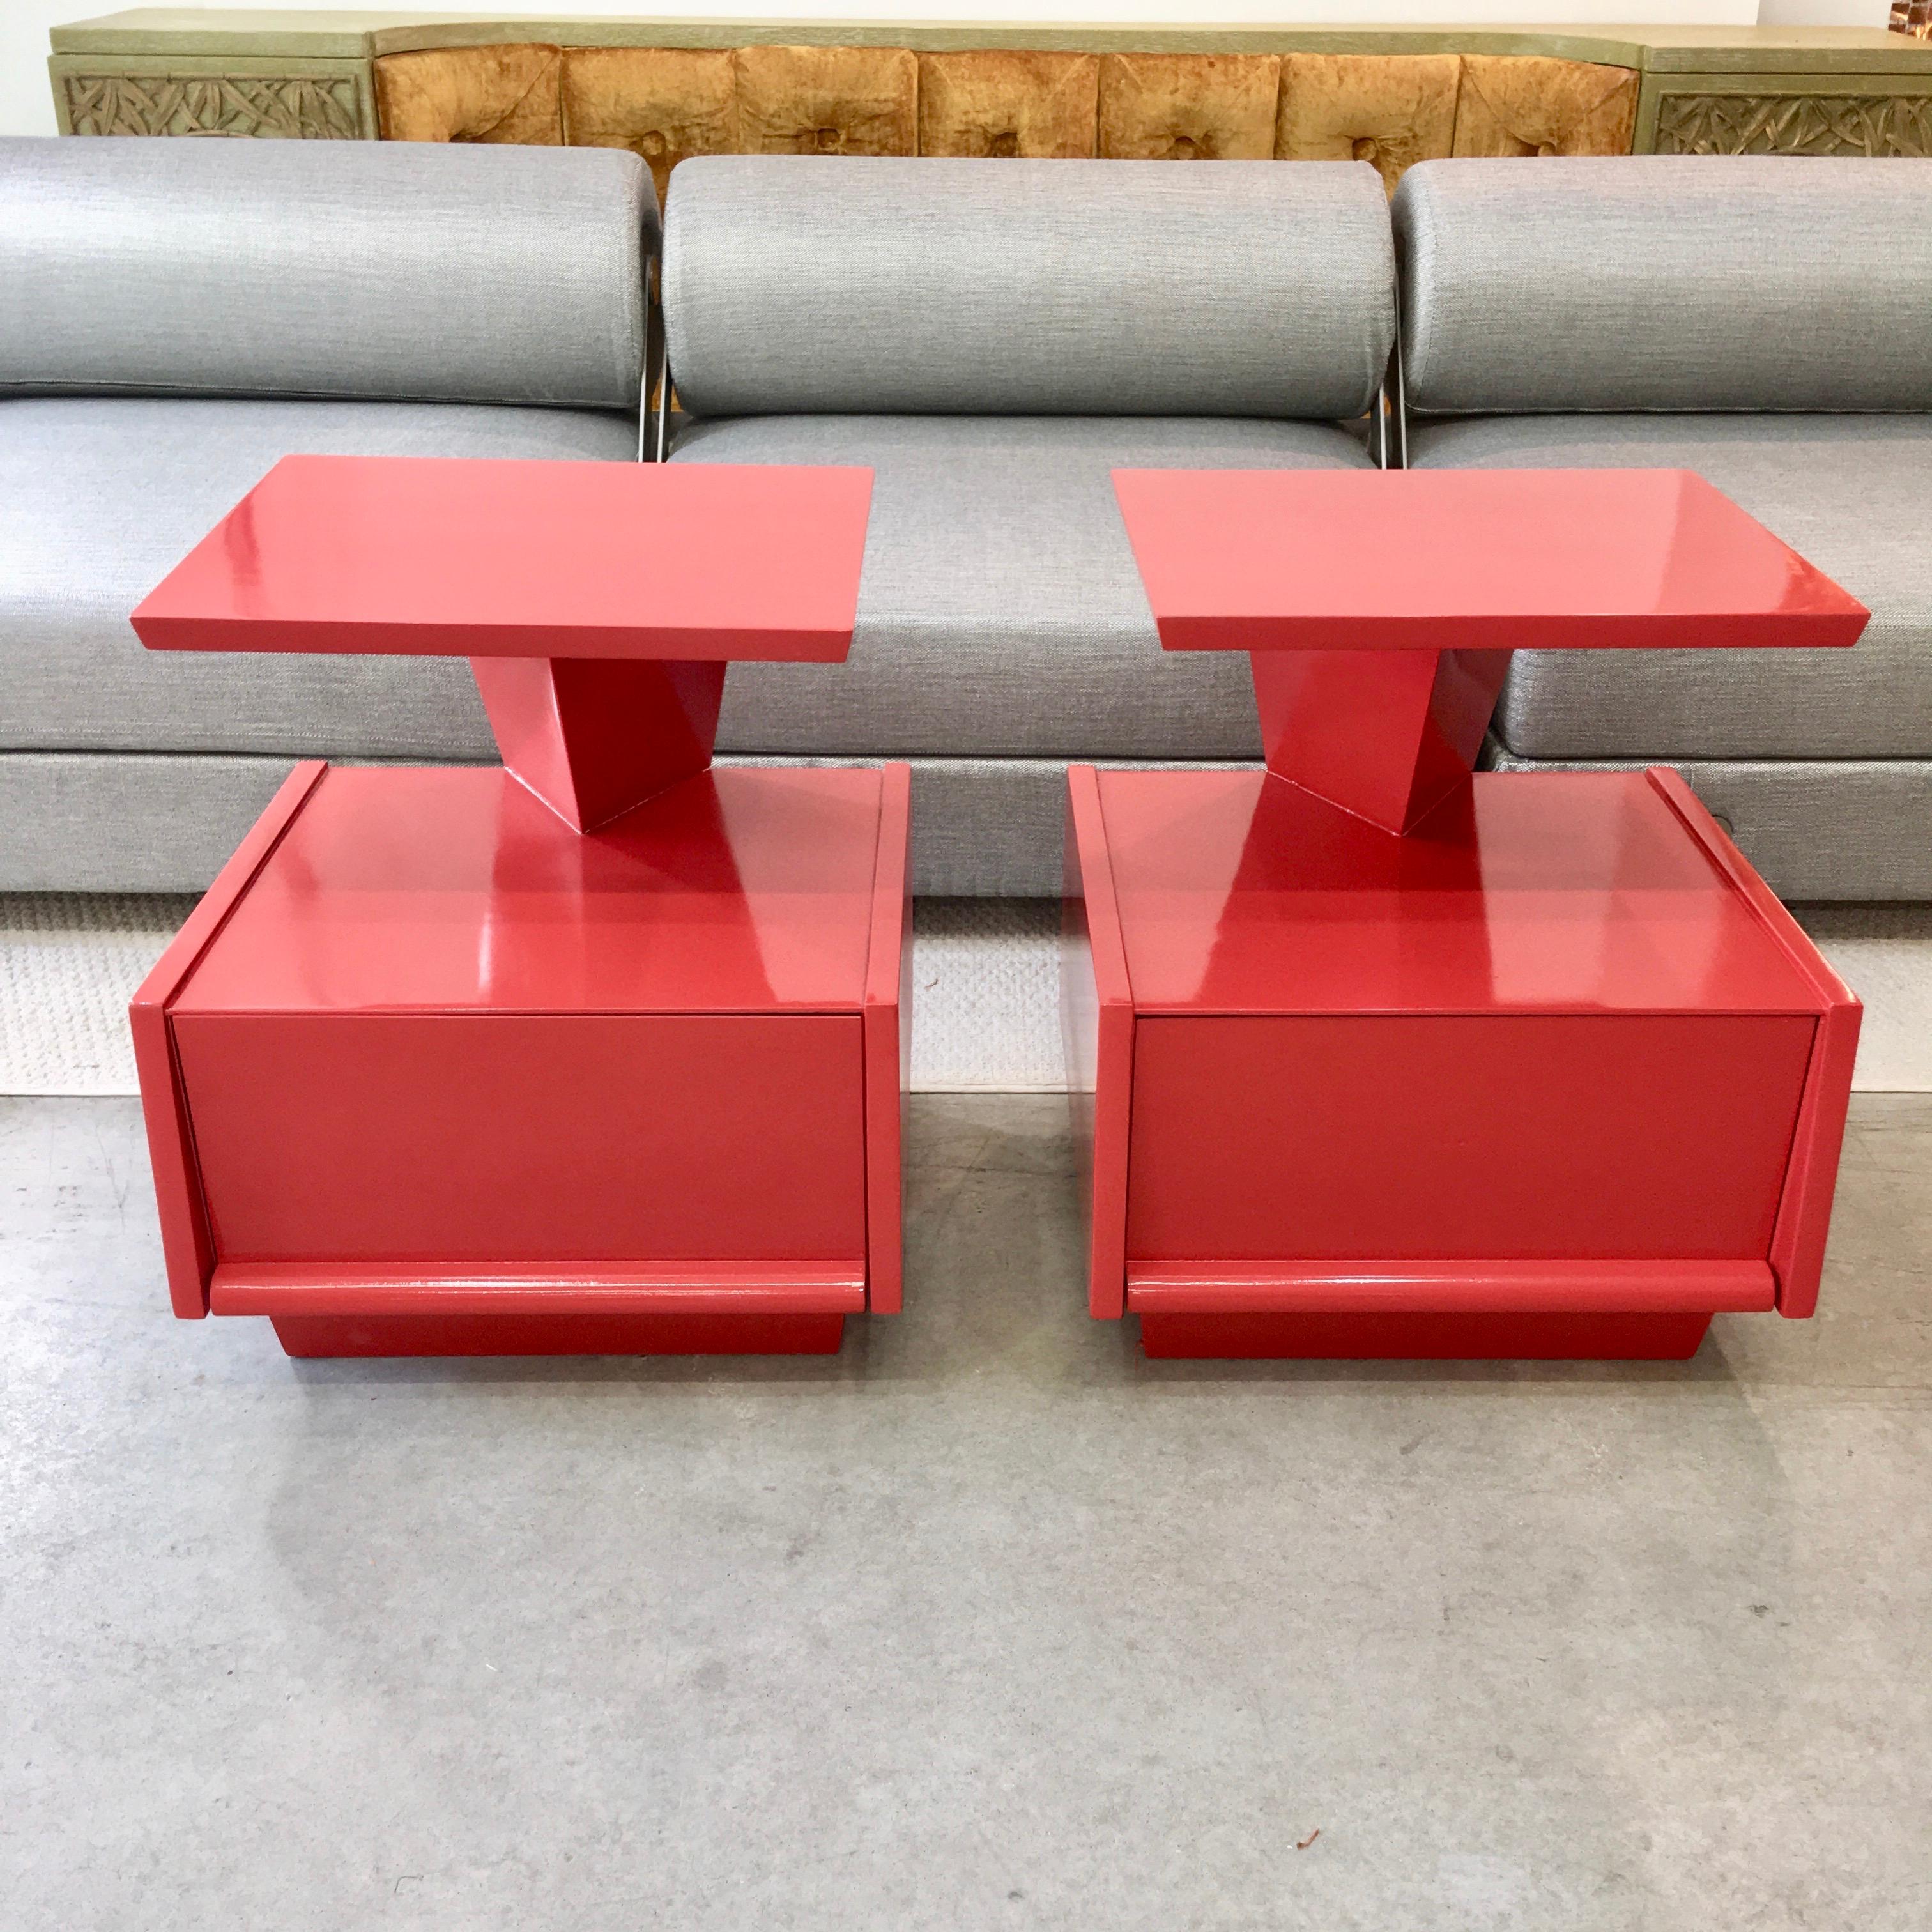 Mid-20th Century Pair of Futuristic 1950s Lacquered Nightstands by Mengel